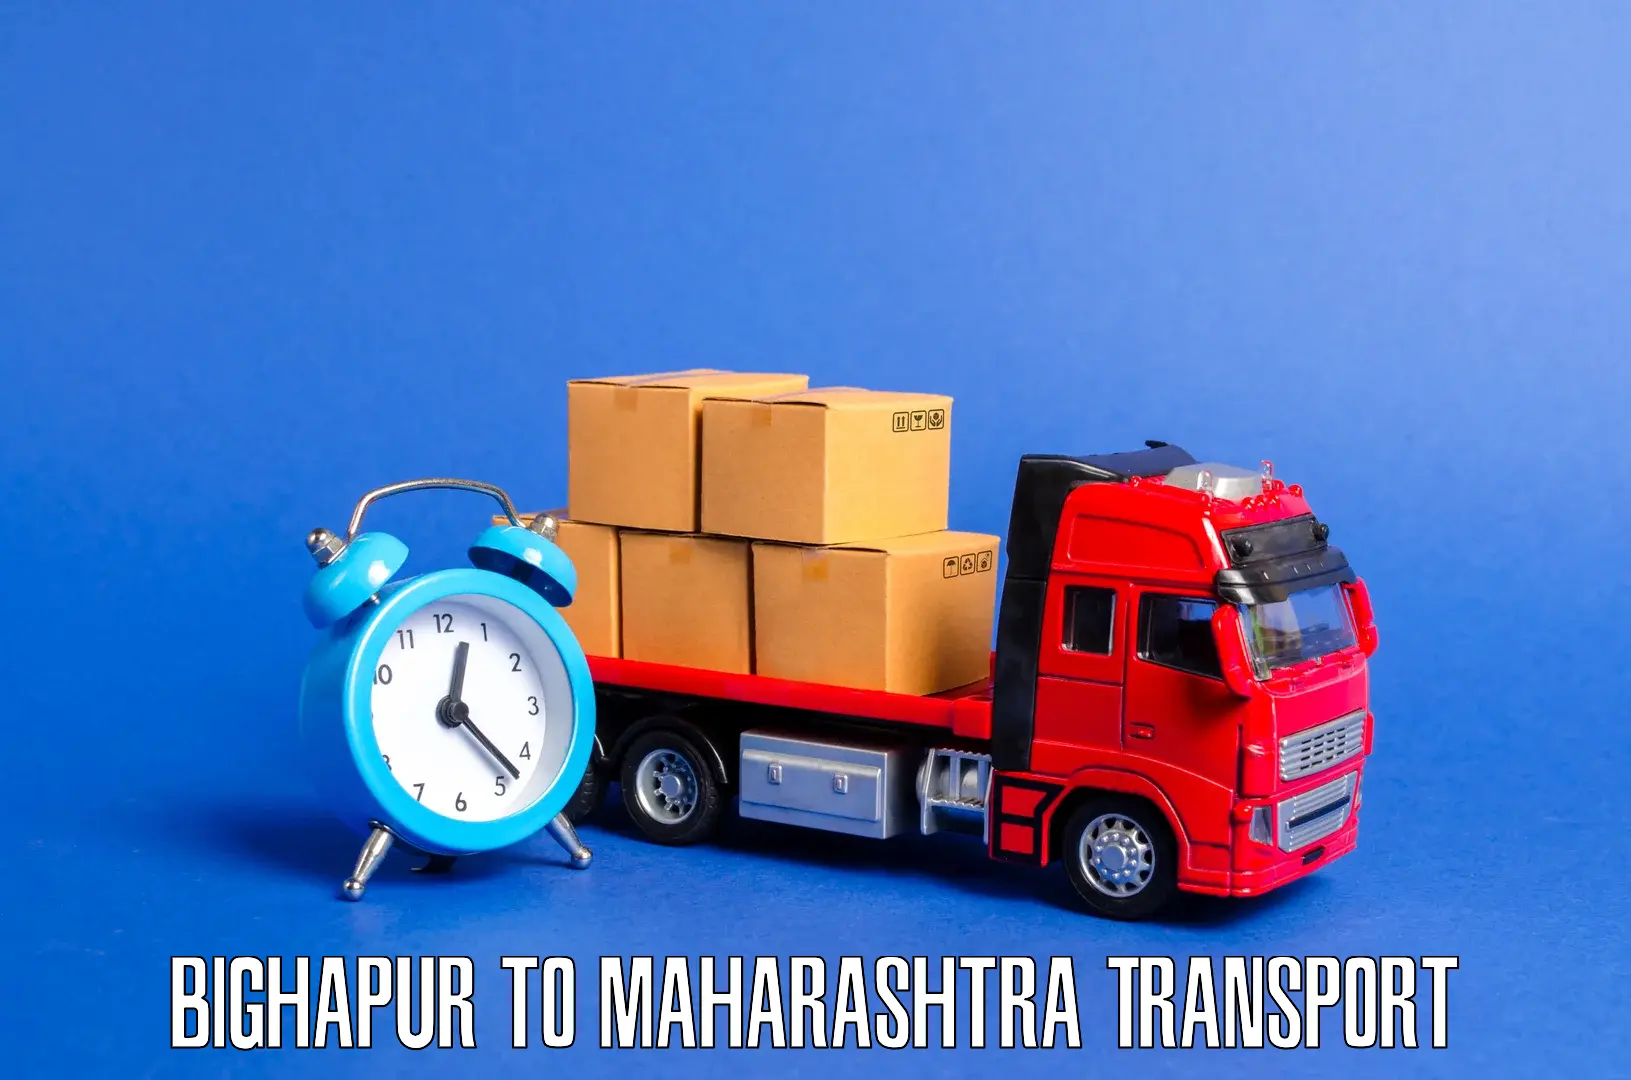 Container transport service Bighapur to Khed